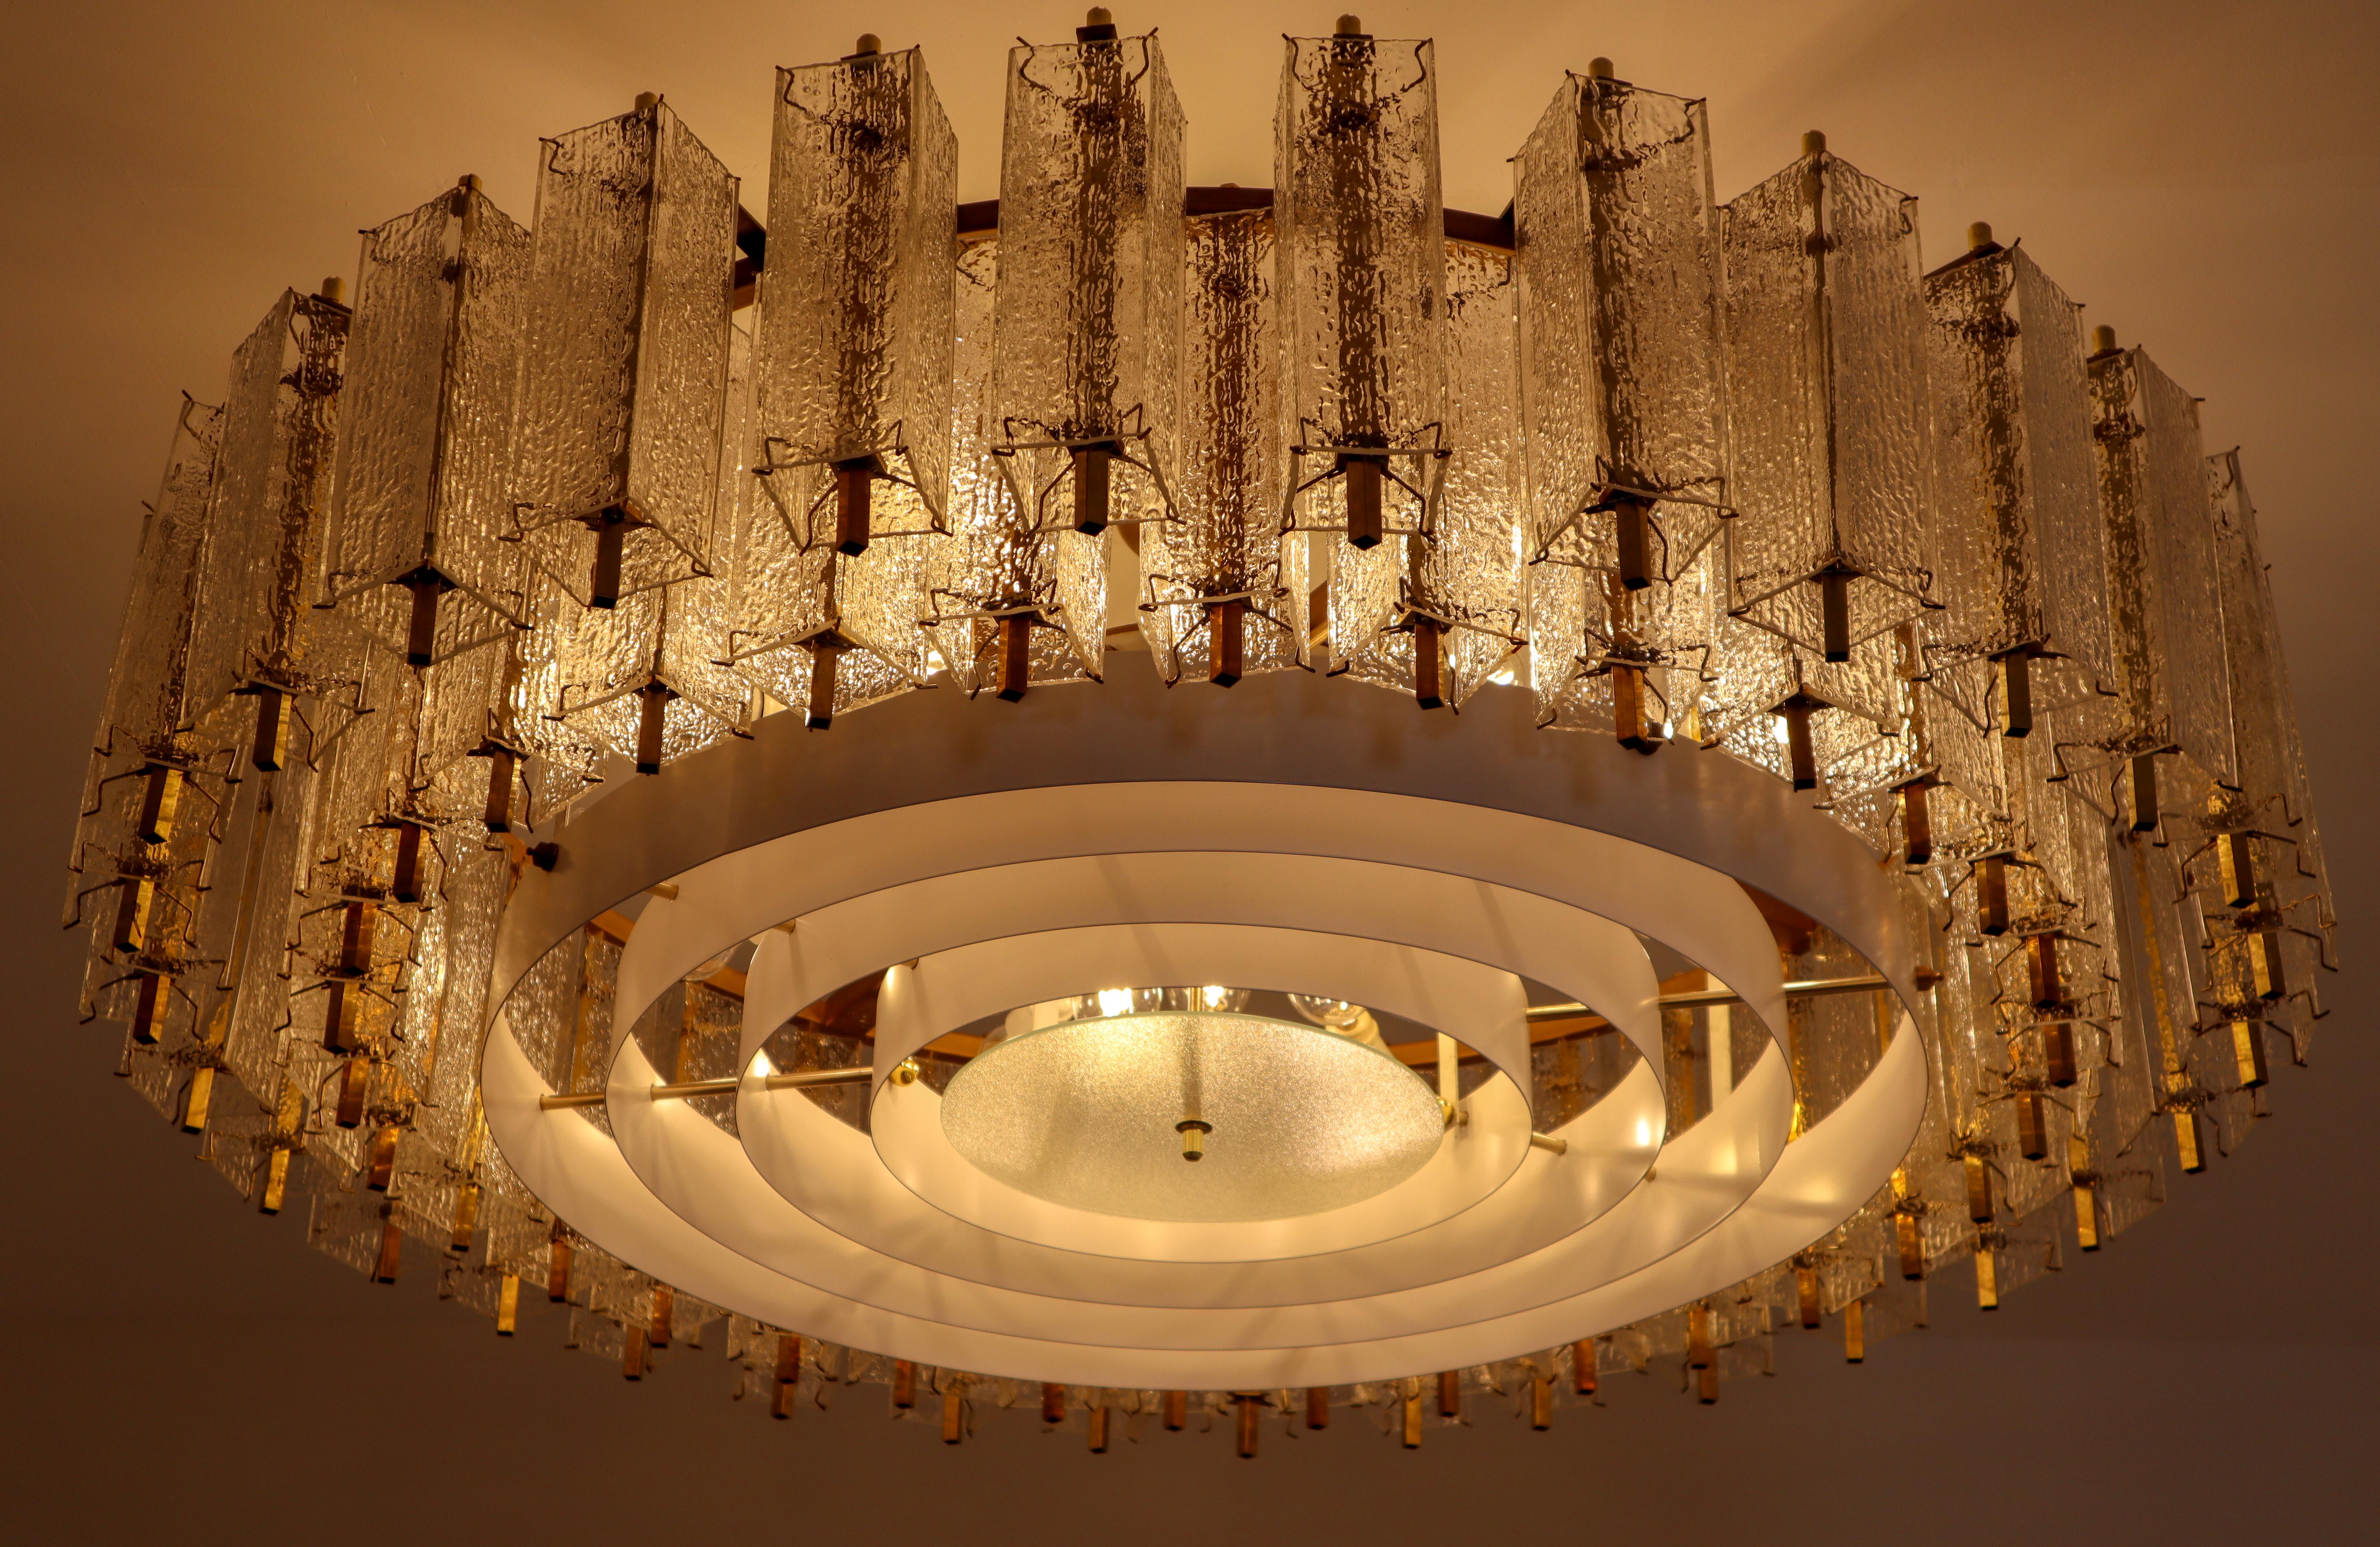 extra large chandeliers